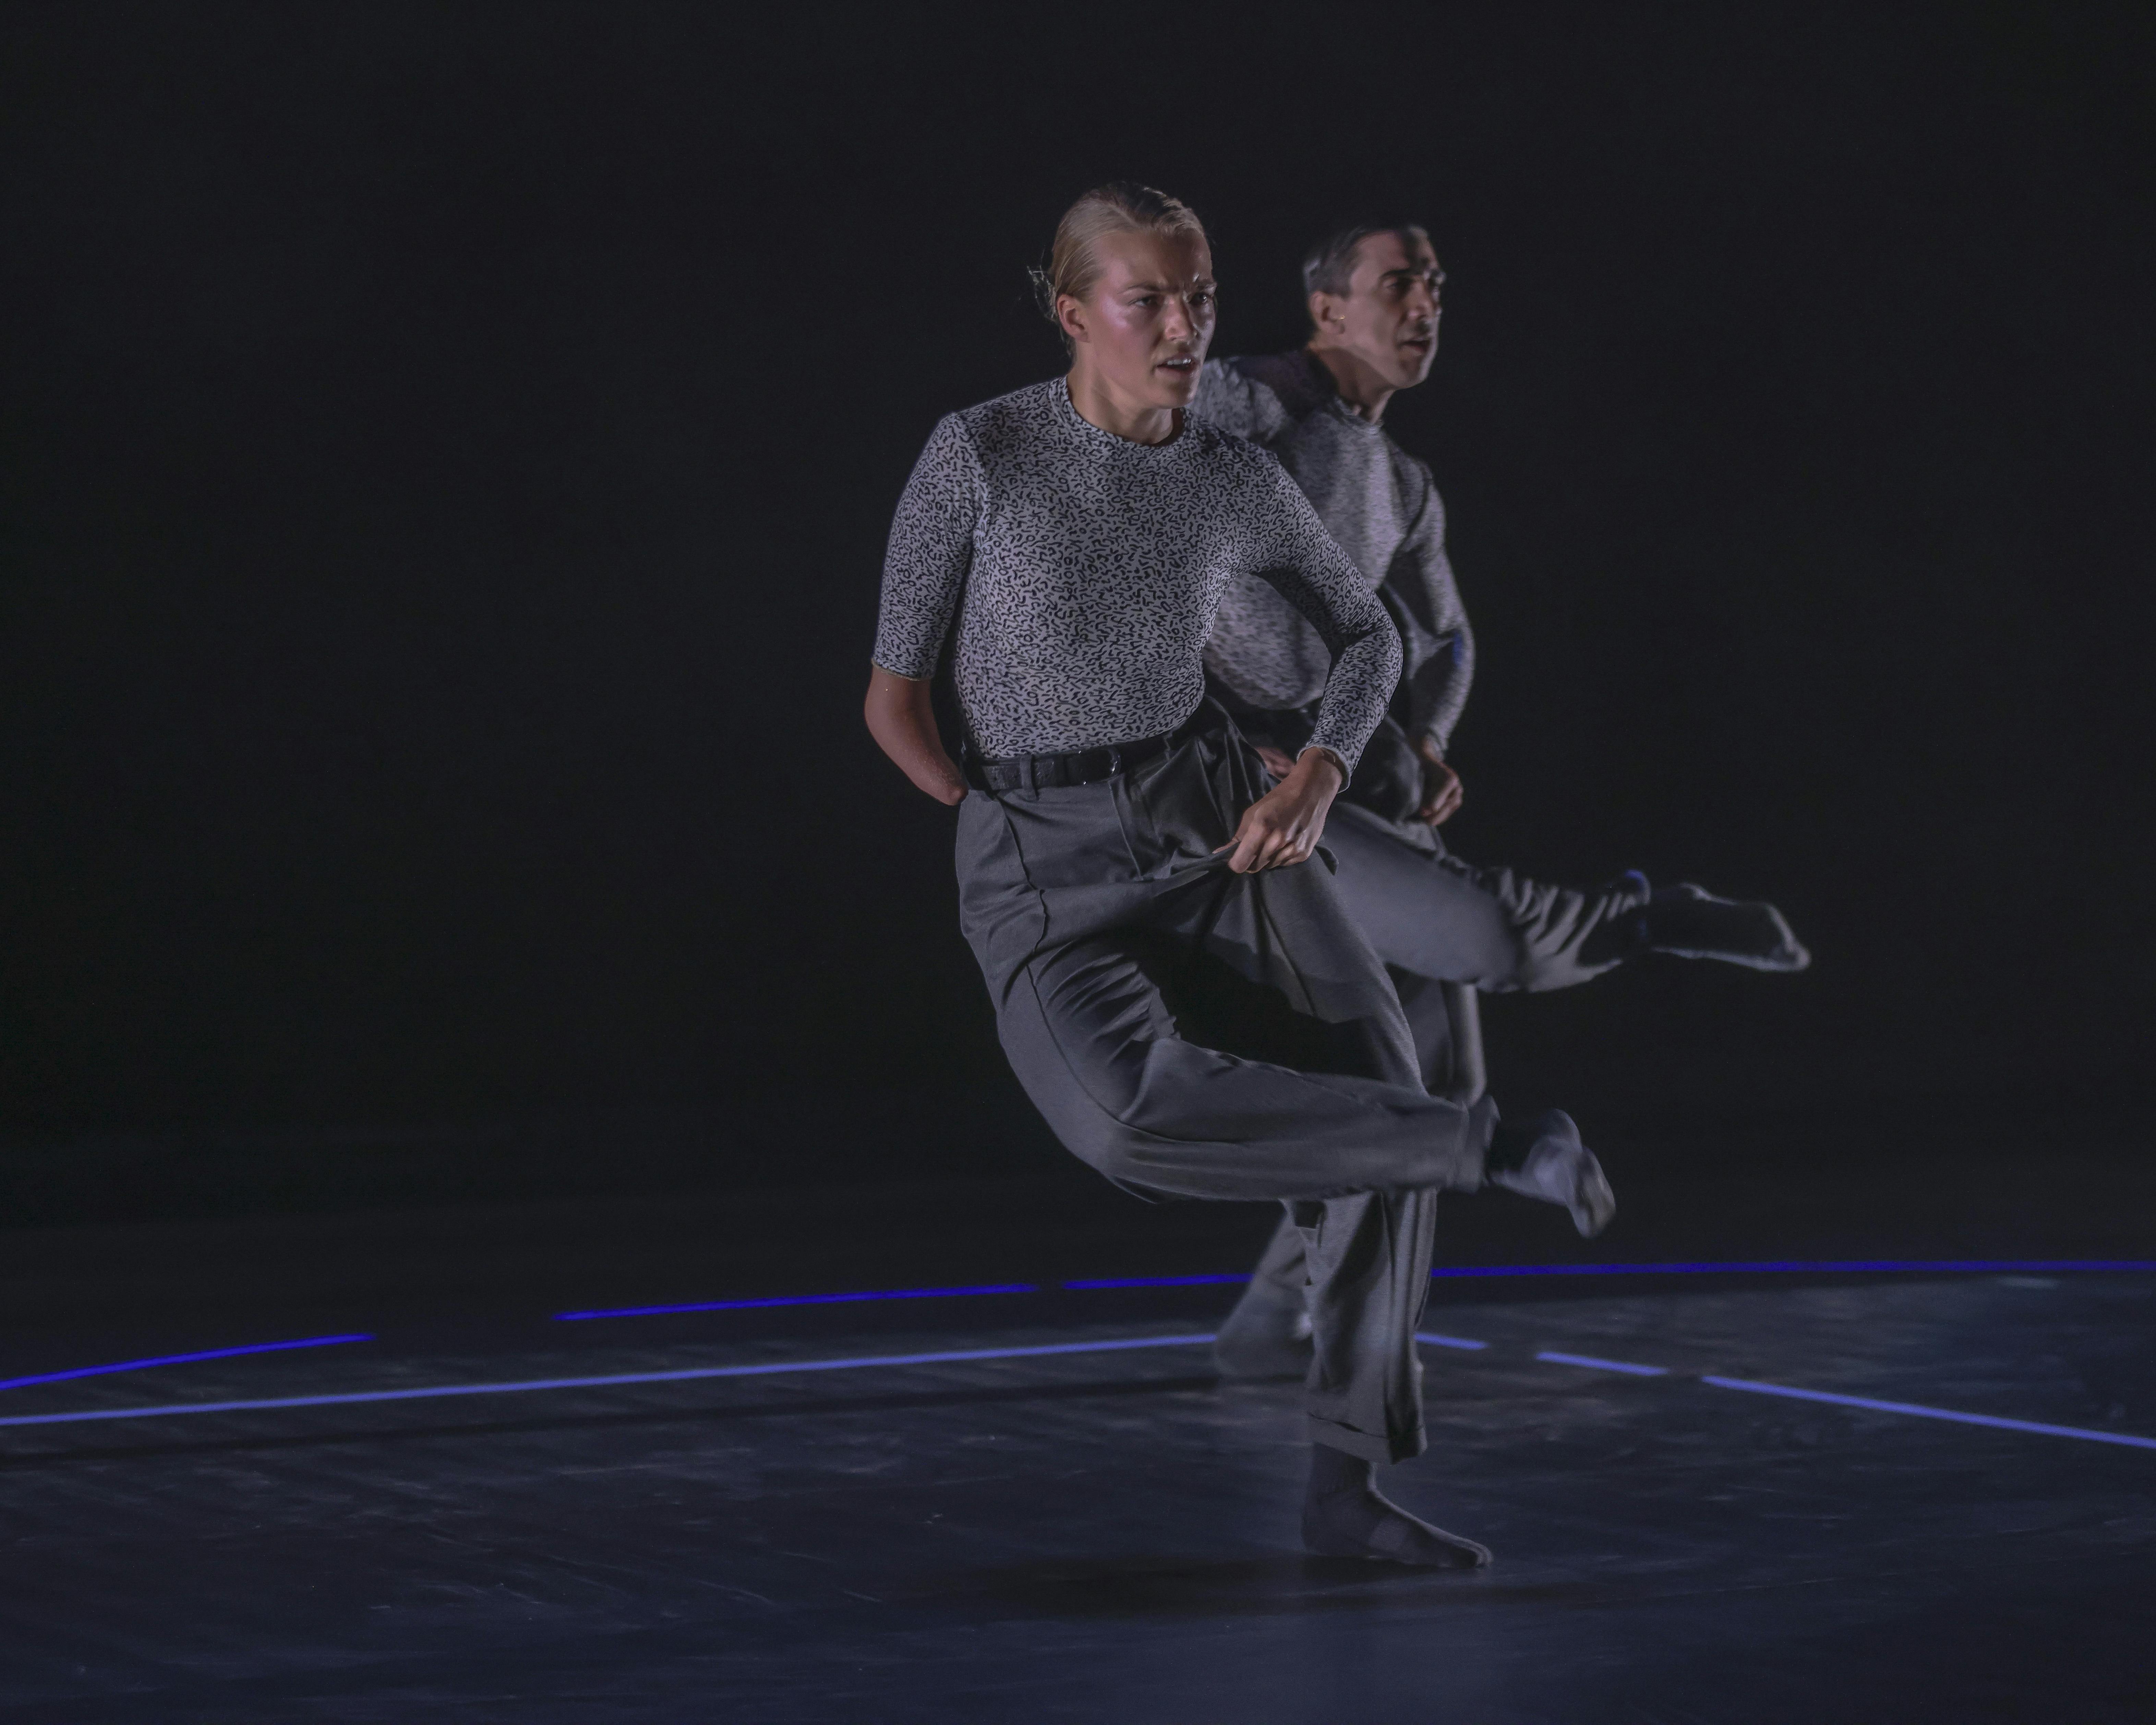 On stage, a dancer bends his right leg by placing his foot on the opposite knee. In front of him, a dancer with a disability does the same movement.